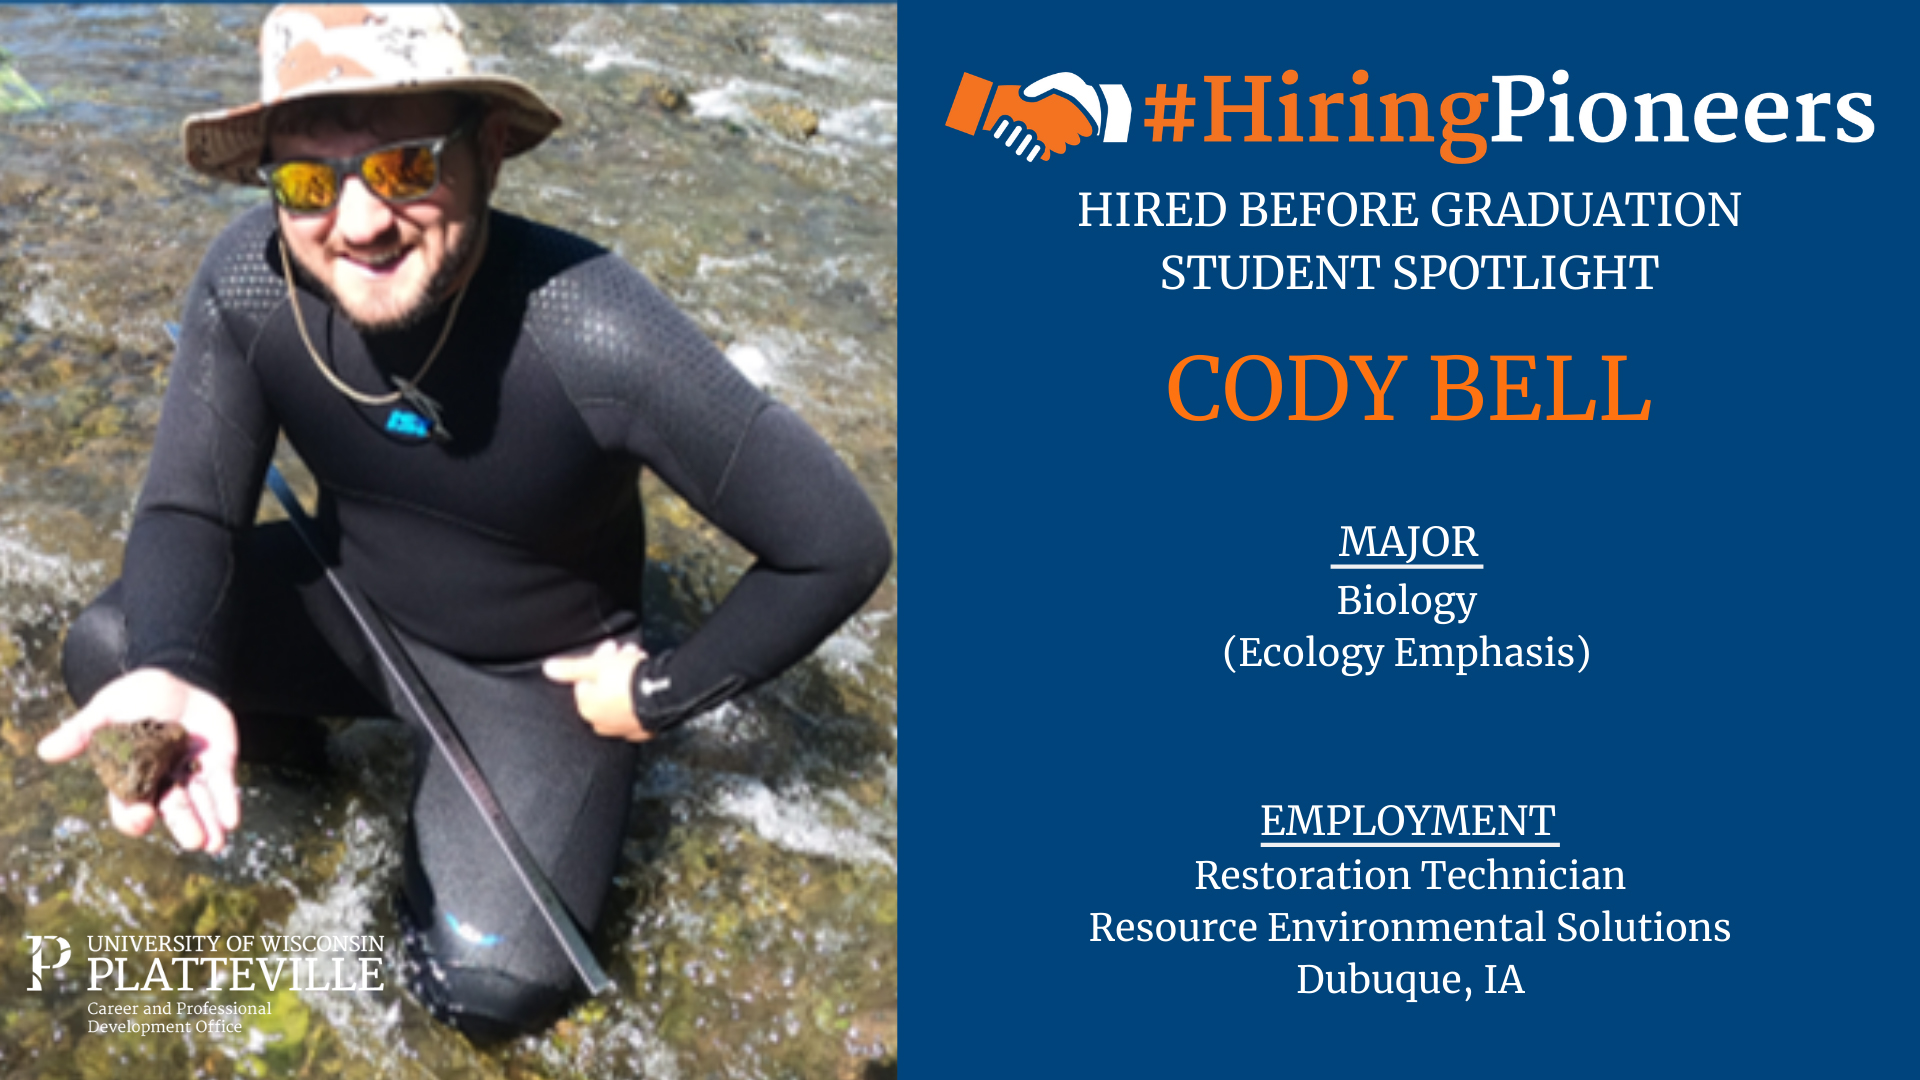 Cody Bell, Hired Before Graduation